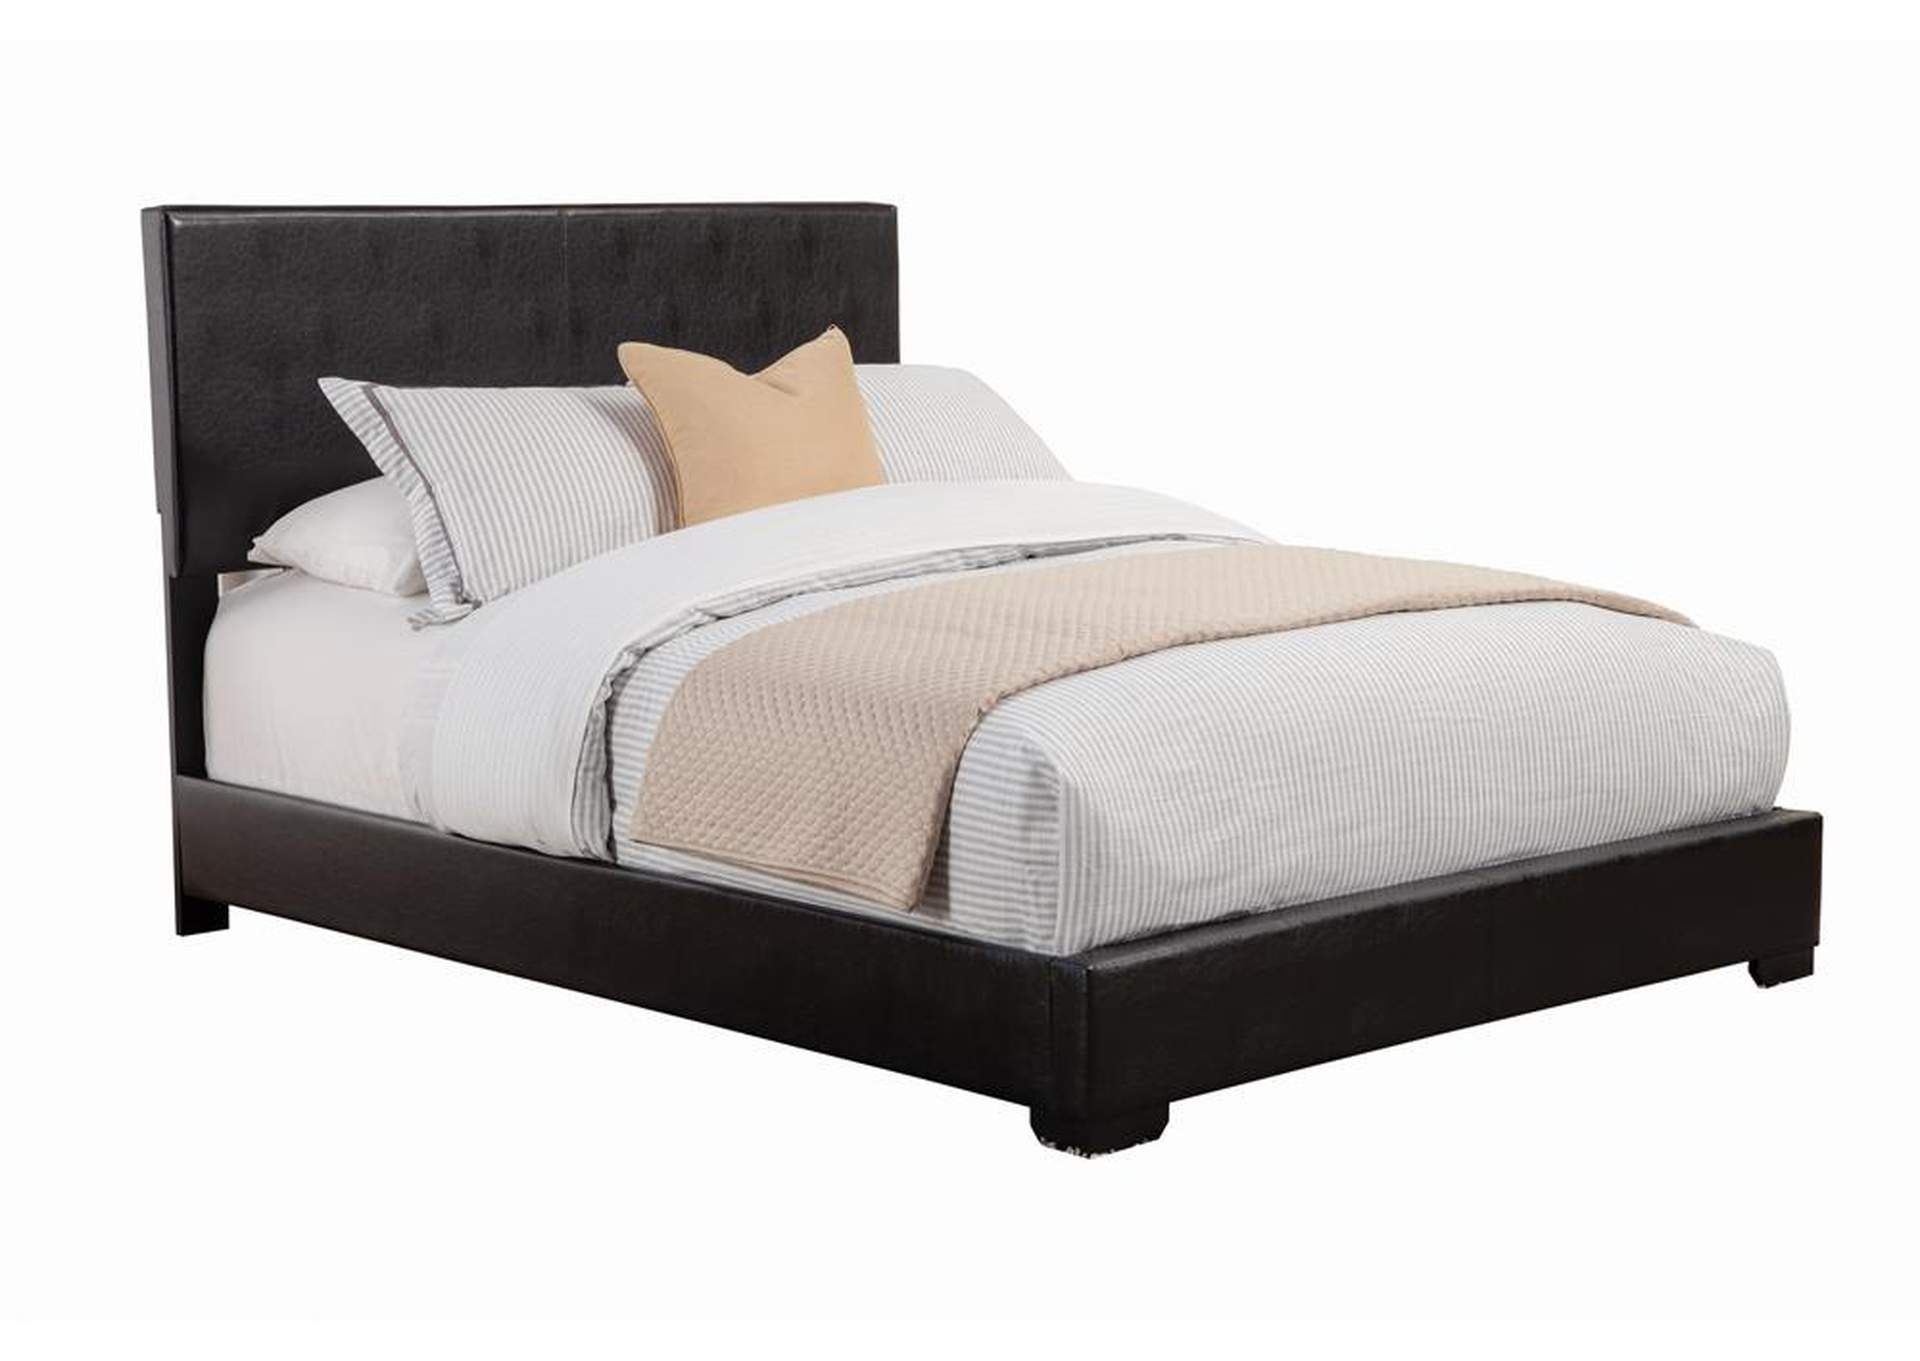 Conner Casual Black Upholstered Queen, Black Upholstered Sleigh Bed Queen